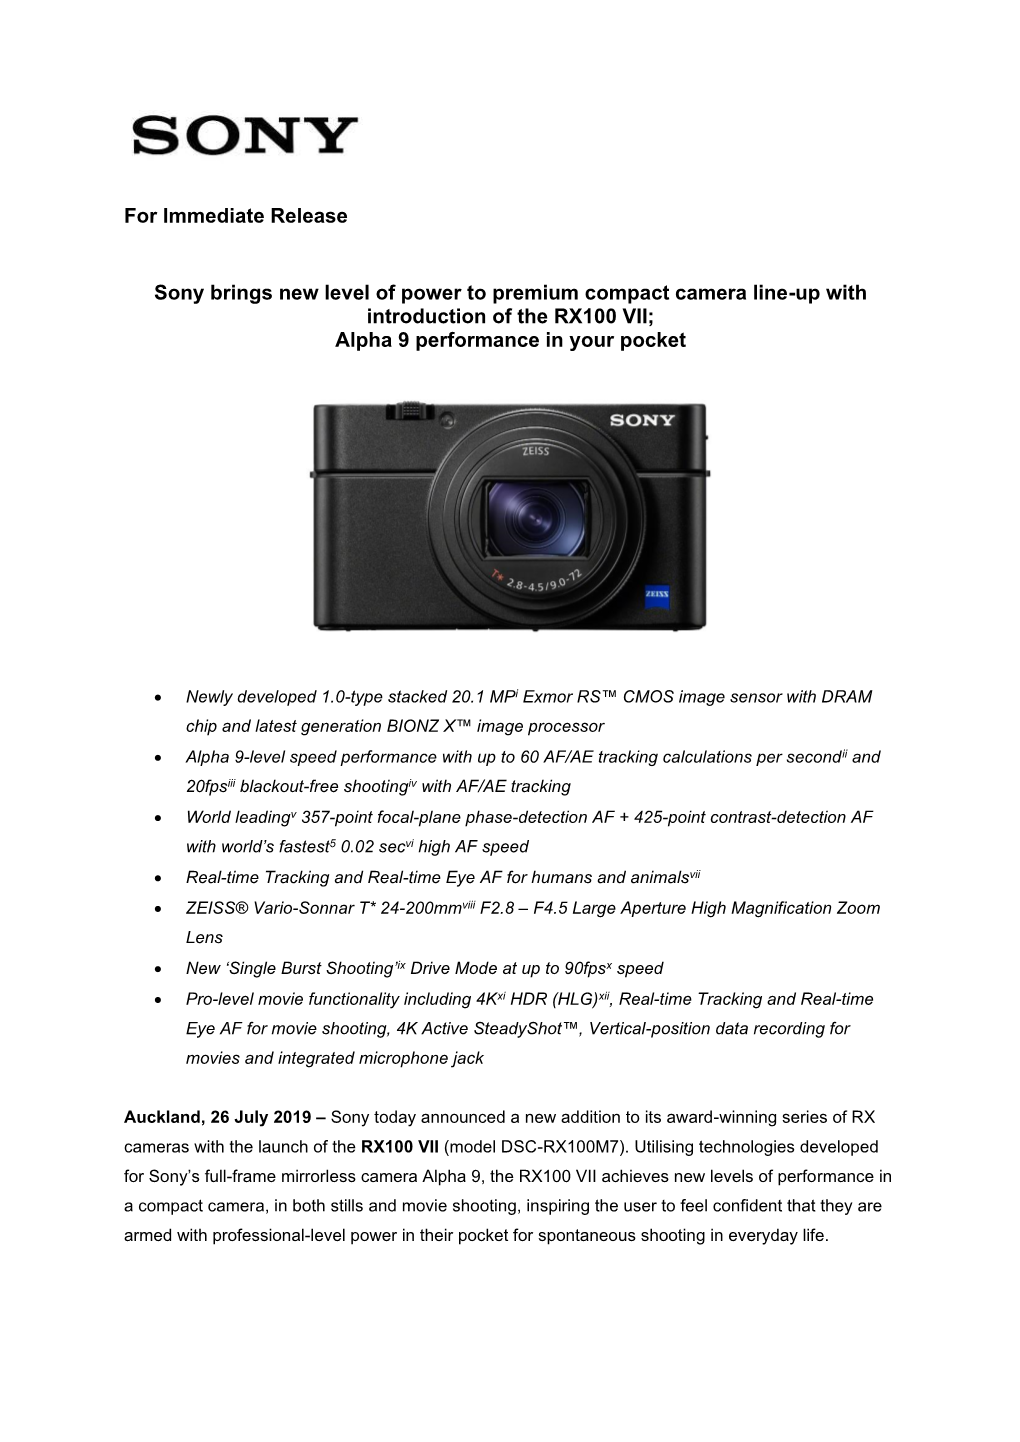 Sony Brings New Level of Power to Premium Compact Camera Line-Up with Introduction of the RX100 VII; Alpha 9 Performance in Your Pocket